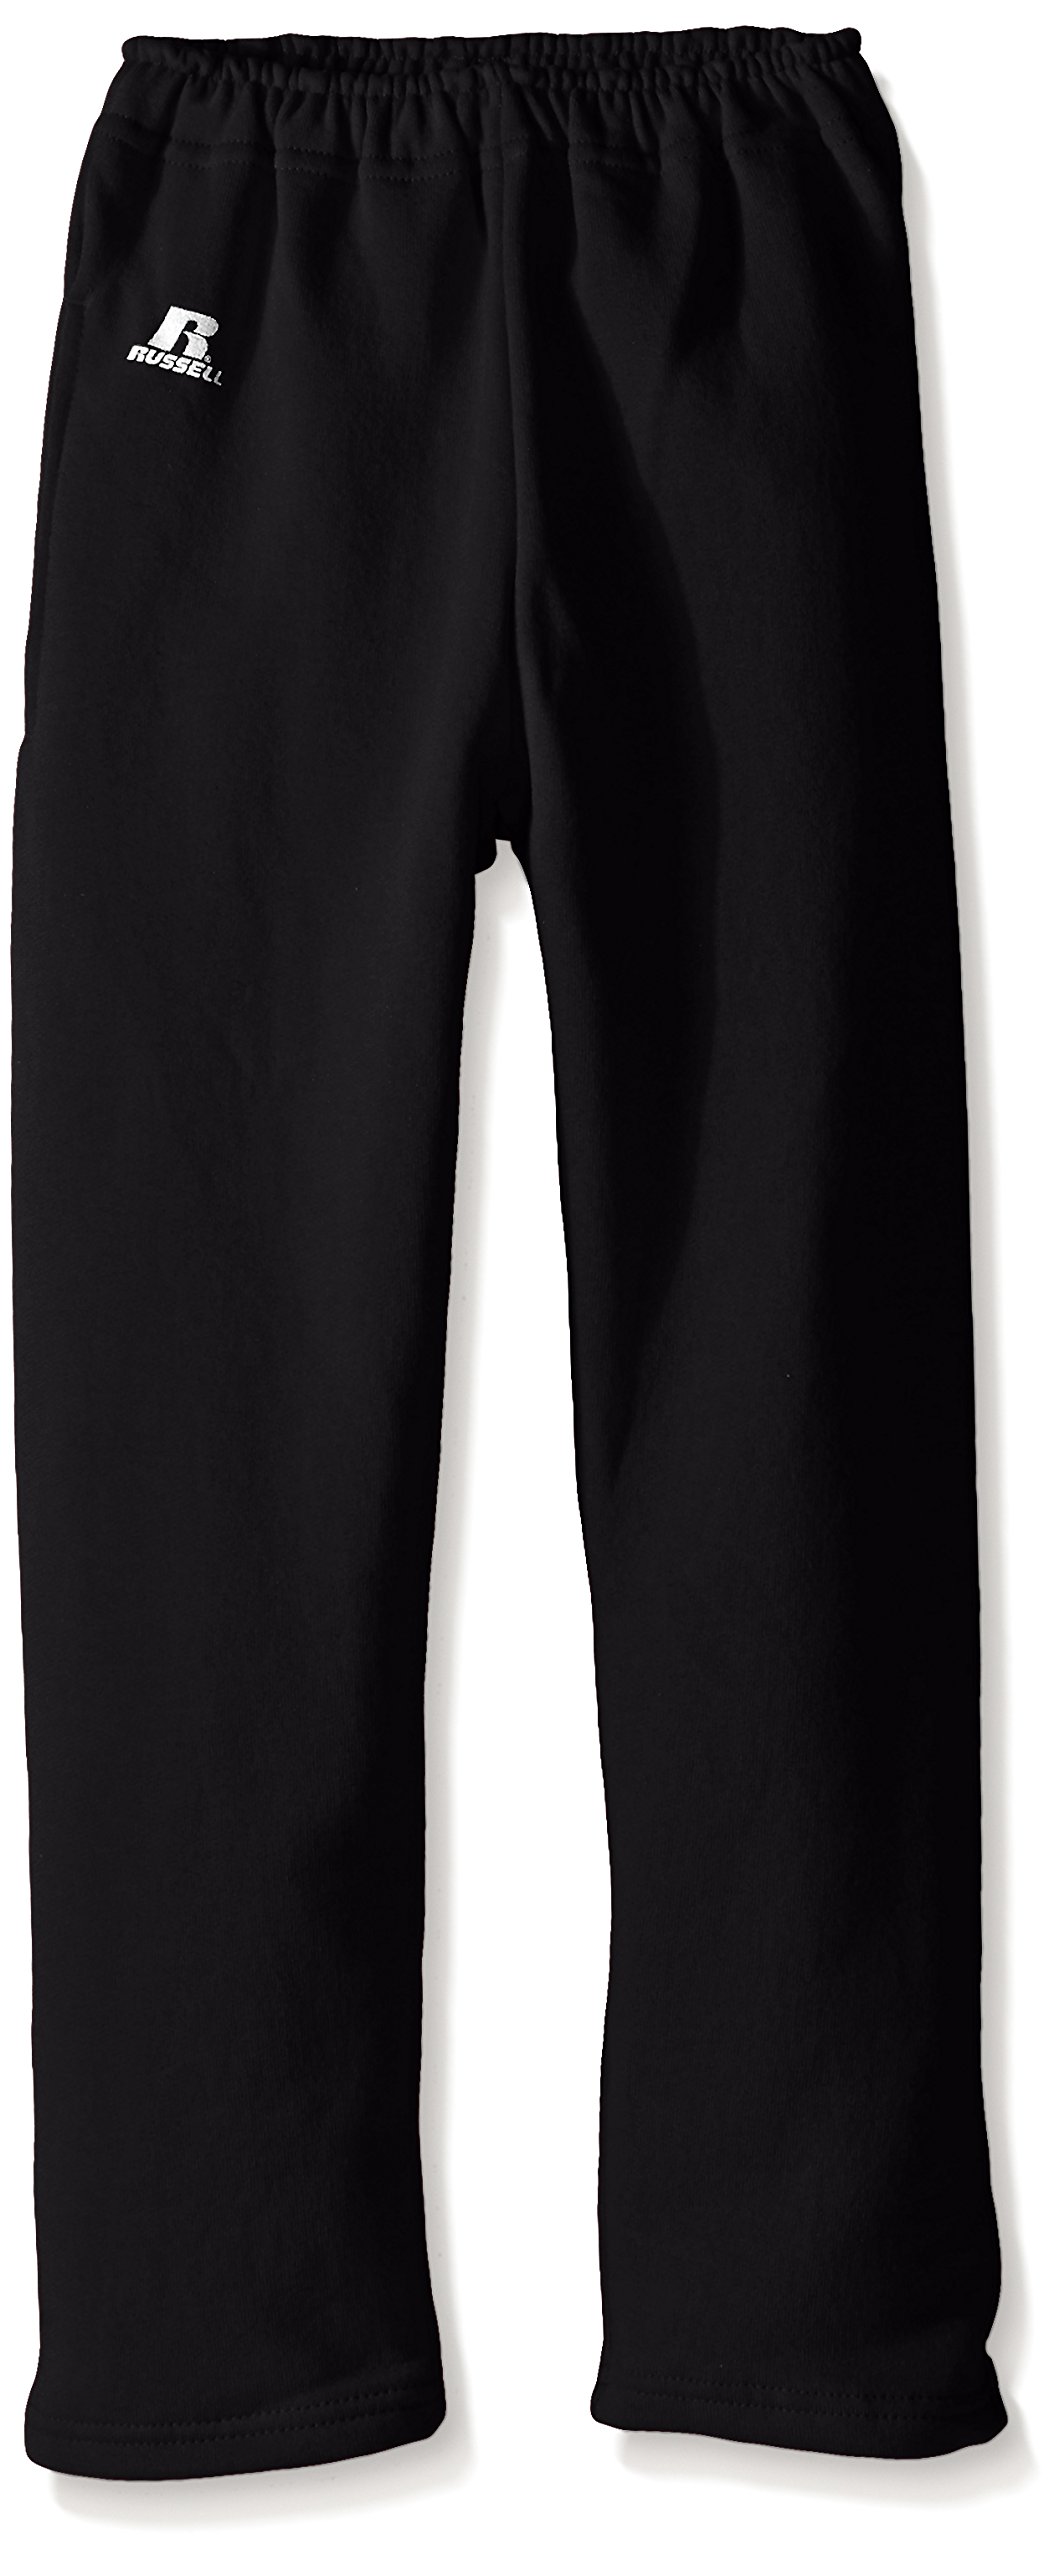 Russell Athletic Youth Dri-Power Fleece Sweatpants & Joggers with Pockets, Moisture Wicking, Sizes S-XL